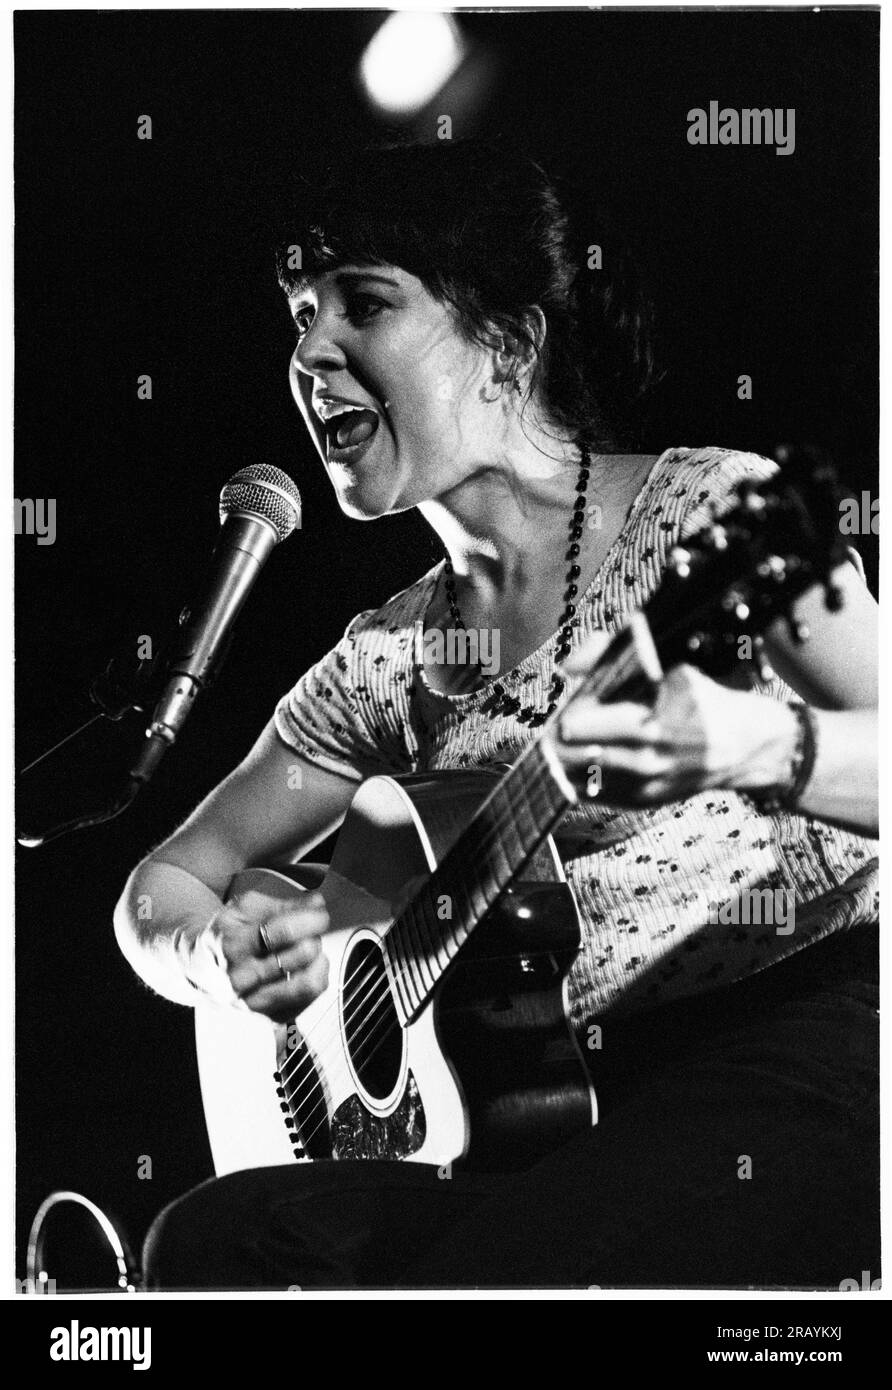 KRISTIN HERSH, BRISTOL, 1994: Kristin Hersh of Throwing Muses playing a live acoustic concert at Bristol St George’s Hall on 24 March 1994. Photograph: Rob Watkins. INFO: Kristin Hersh, an American singer-songwriter, is known for her influential role in alternative rock. As the frontwoman of Throwing Muses, her distinctive voice and poetic songwriting, showcased in solo works like 'Hips and Makers,' have left an enduring impact on the alternative and indie music landscapes. Stock Photo